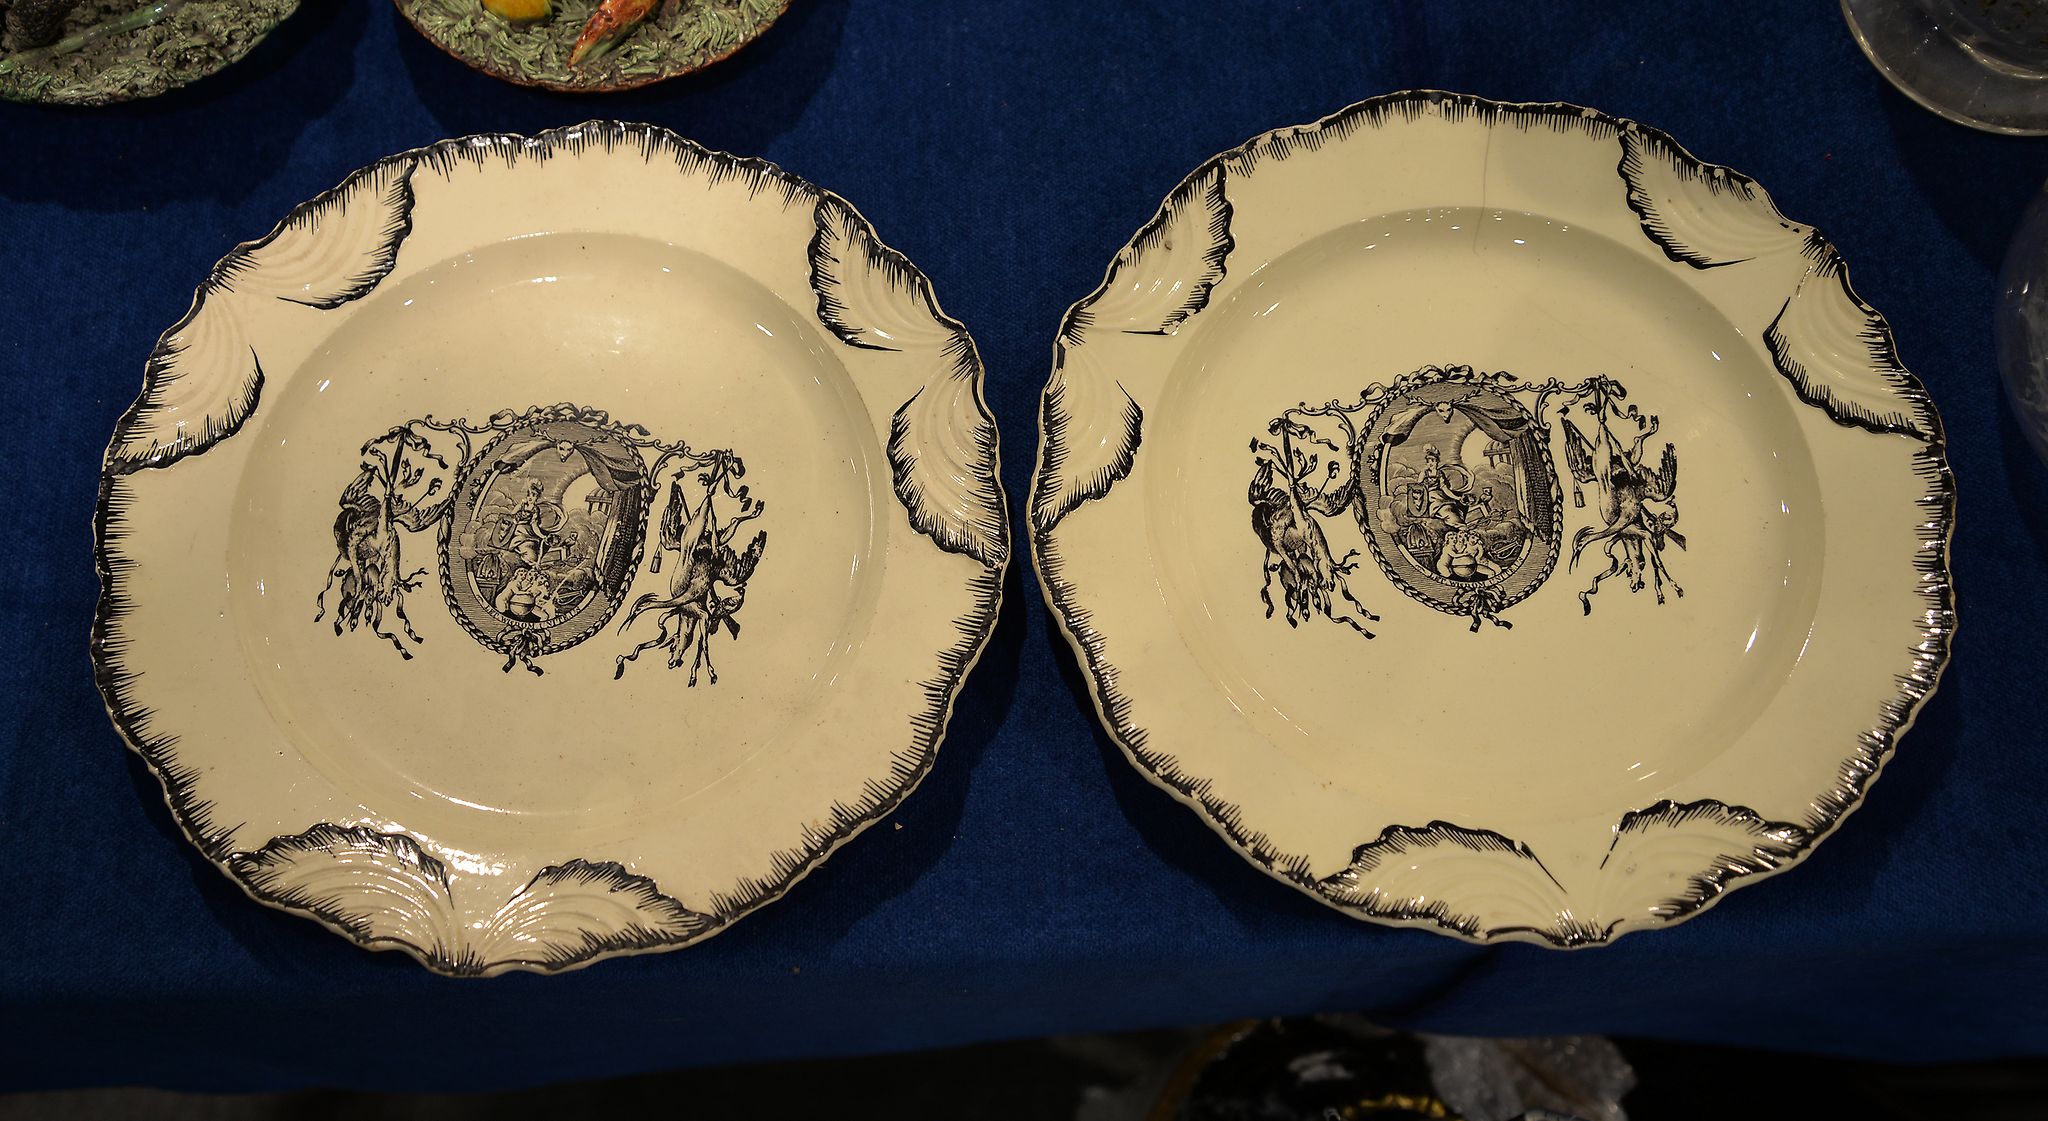 A pair of late 18th century creamware plates, printed in black with Britannia, and inscribed 'Let